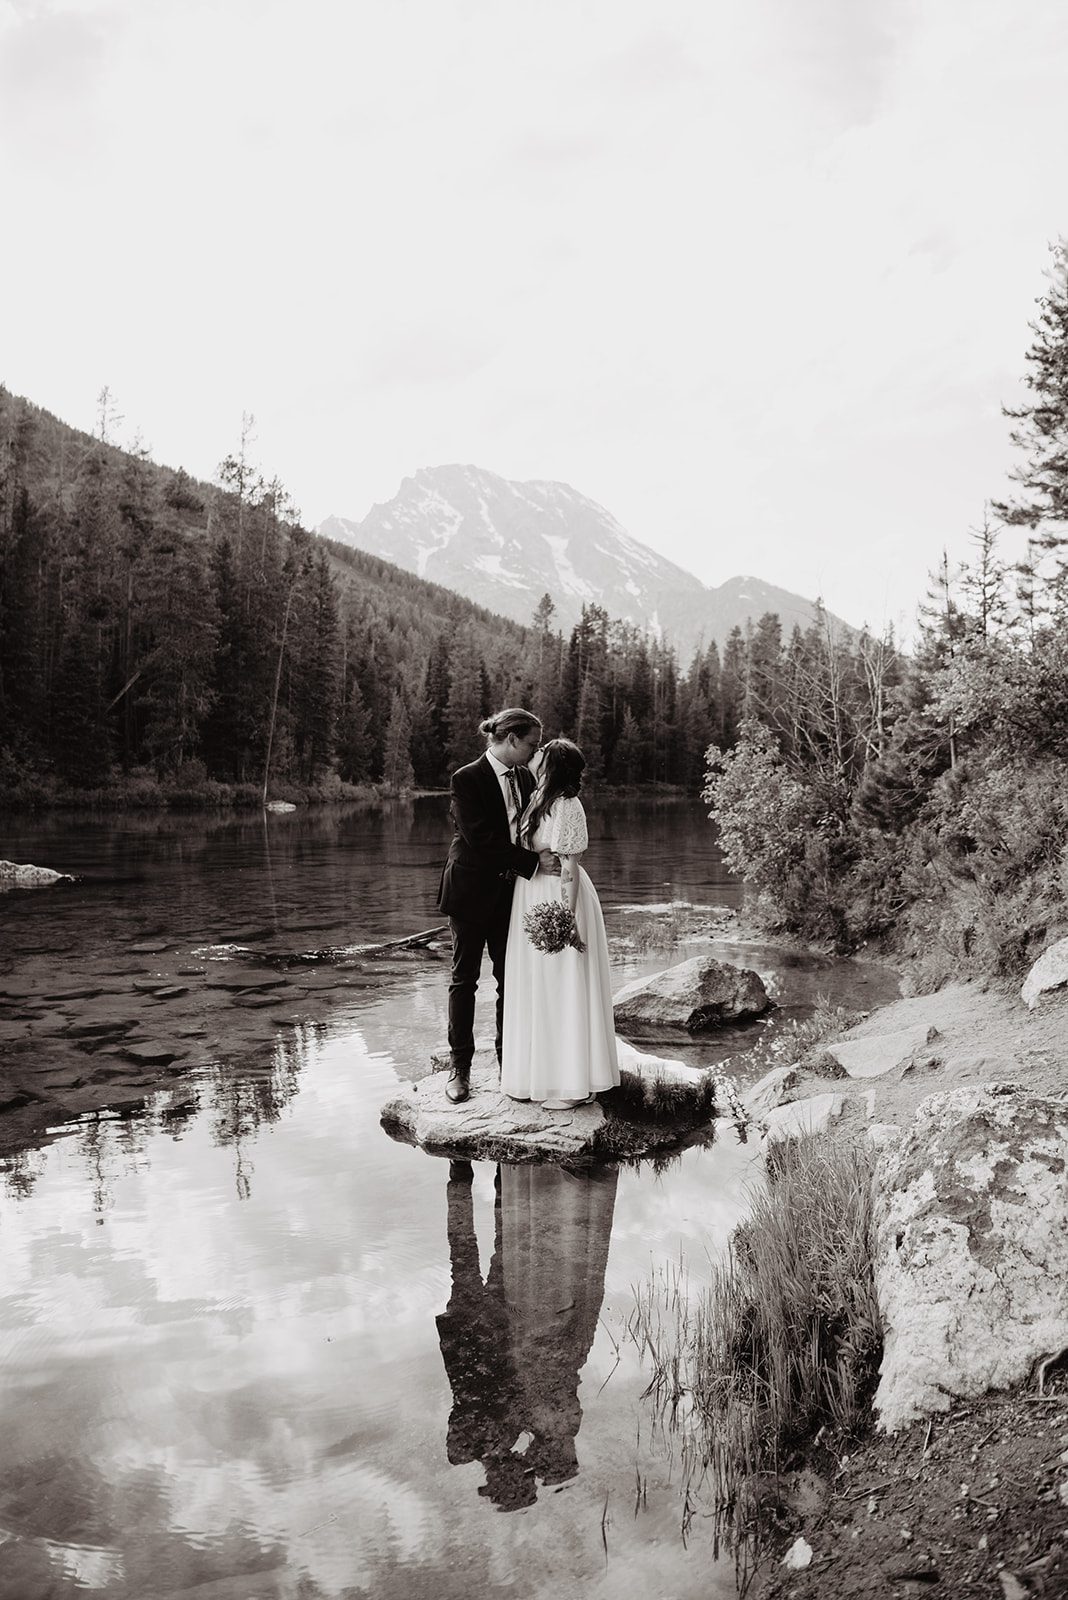 black and white wedding photo with bride and groom standing on a rock in a lake and embracing